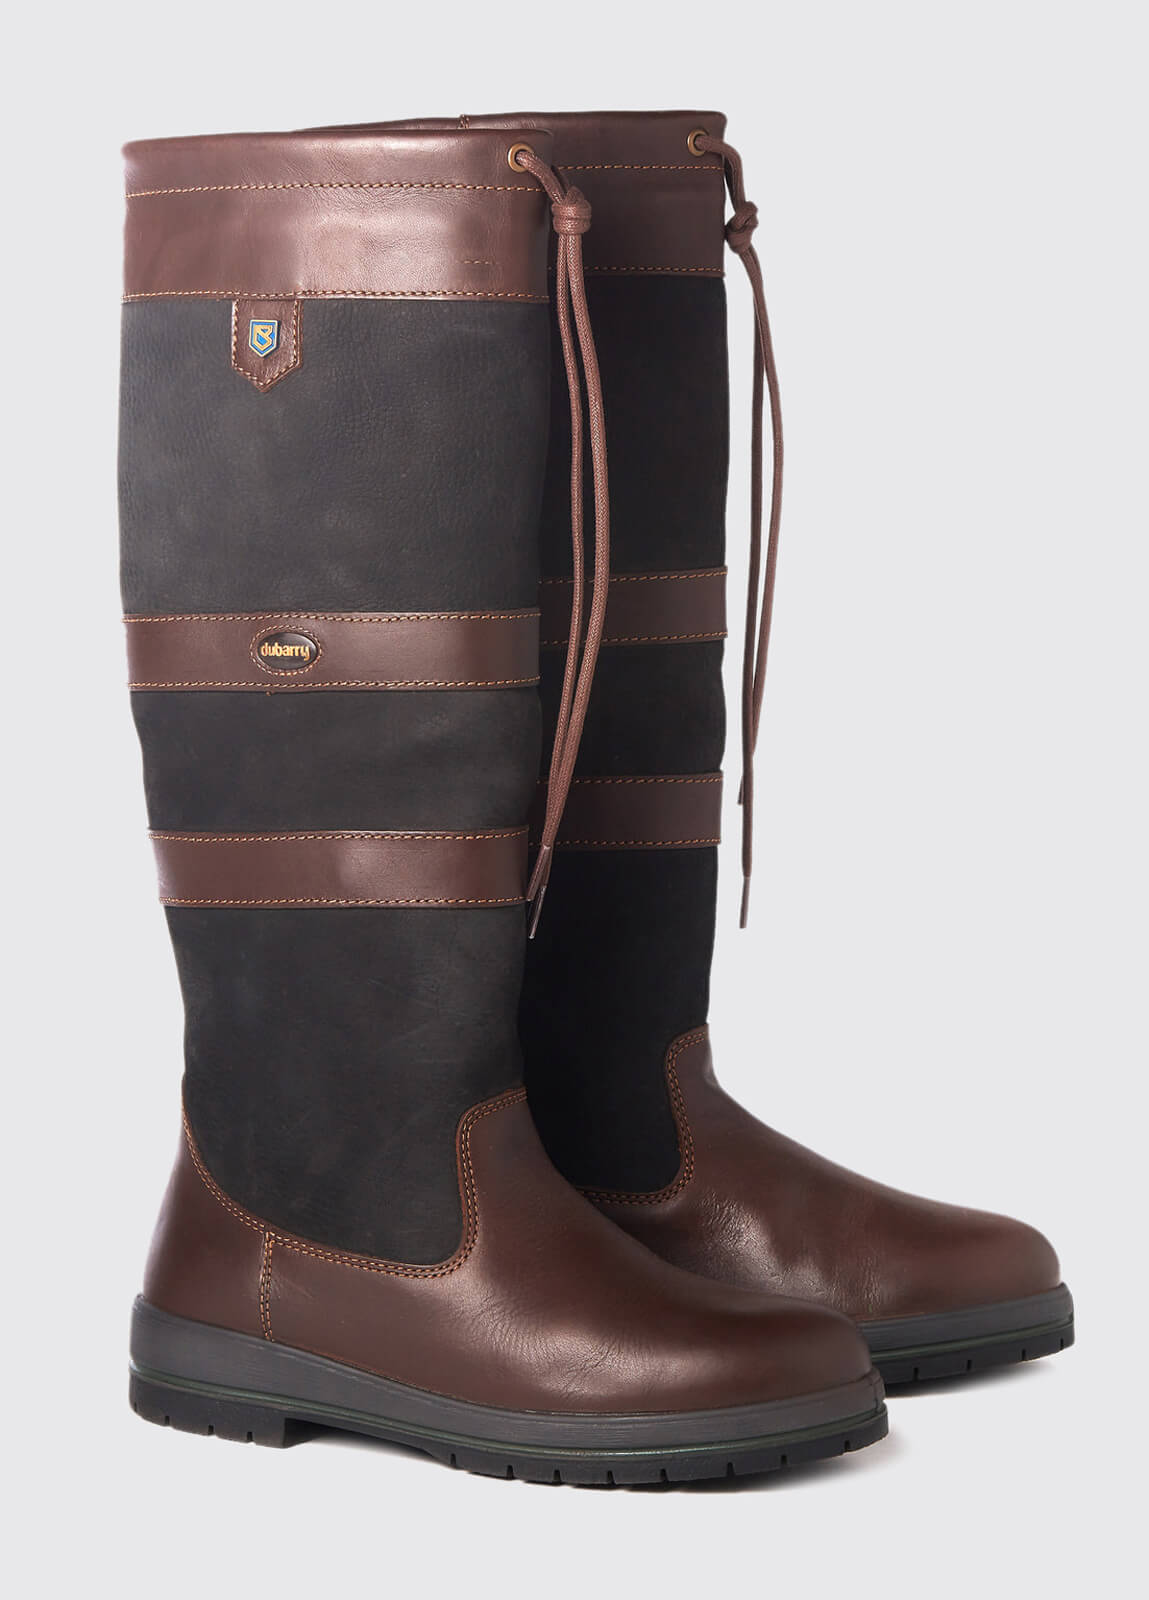 dubarry galway slimfit boots sale